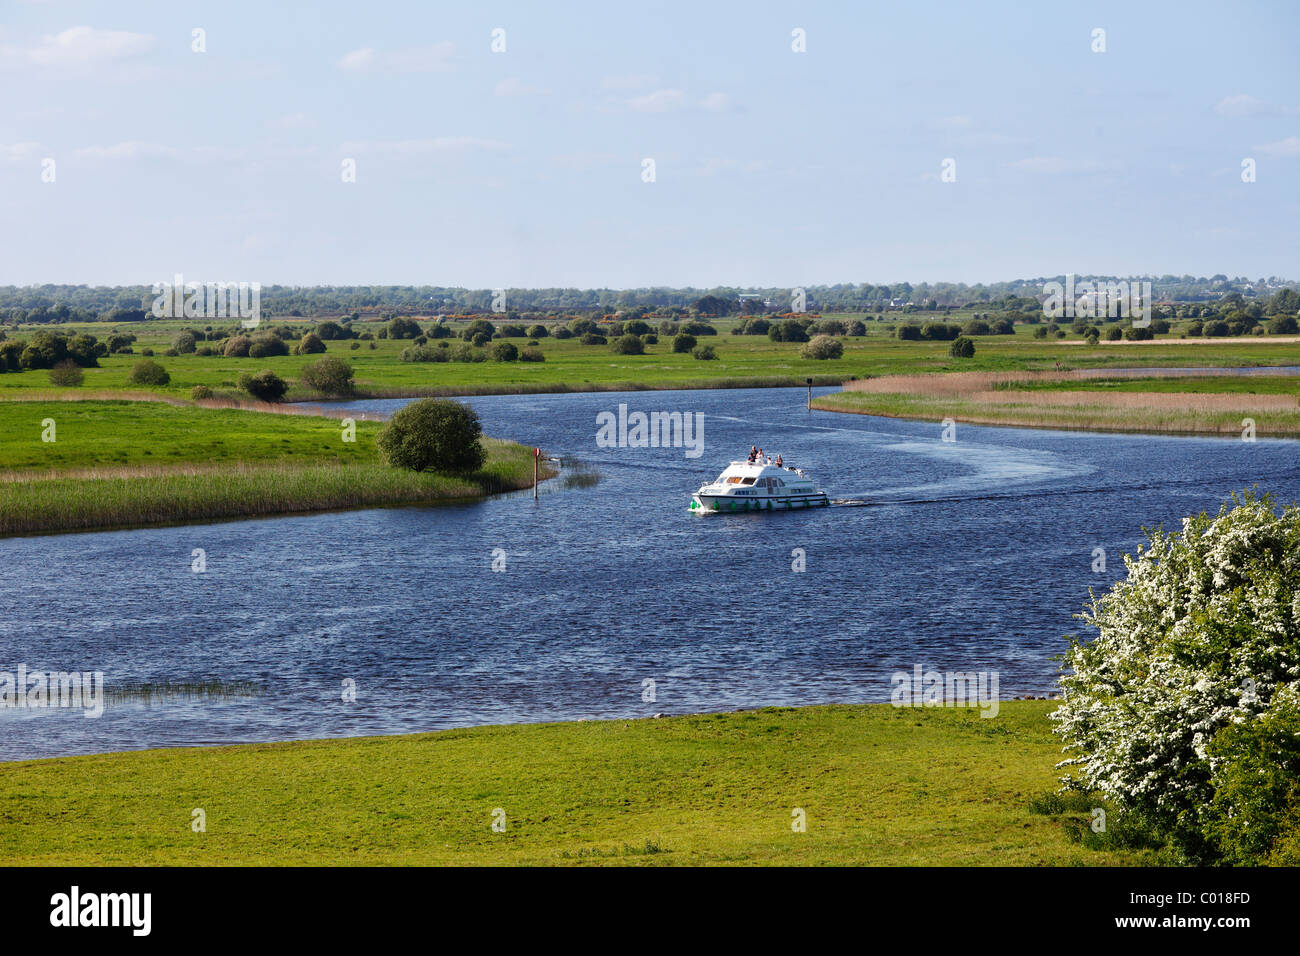 Boat on the Shannon River, Clonmacnoise, County Offaly, Leinster, Republic of Ireland, Europe Stock Photo